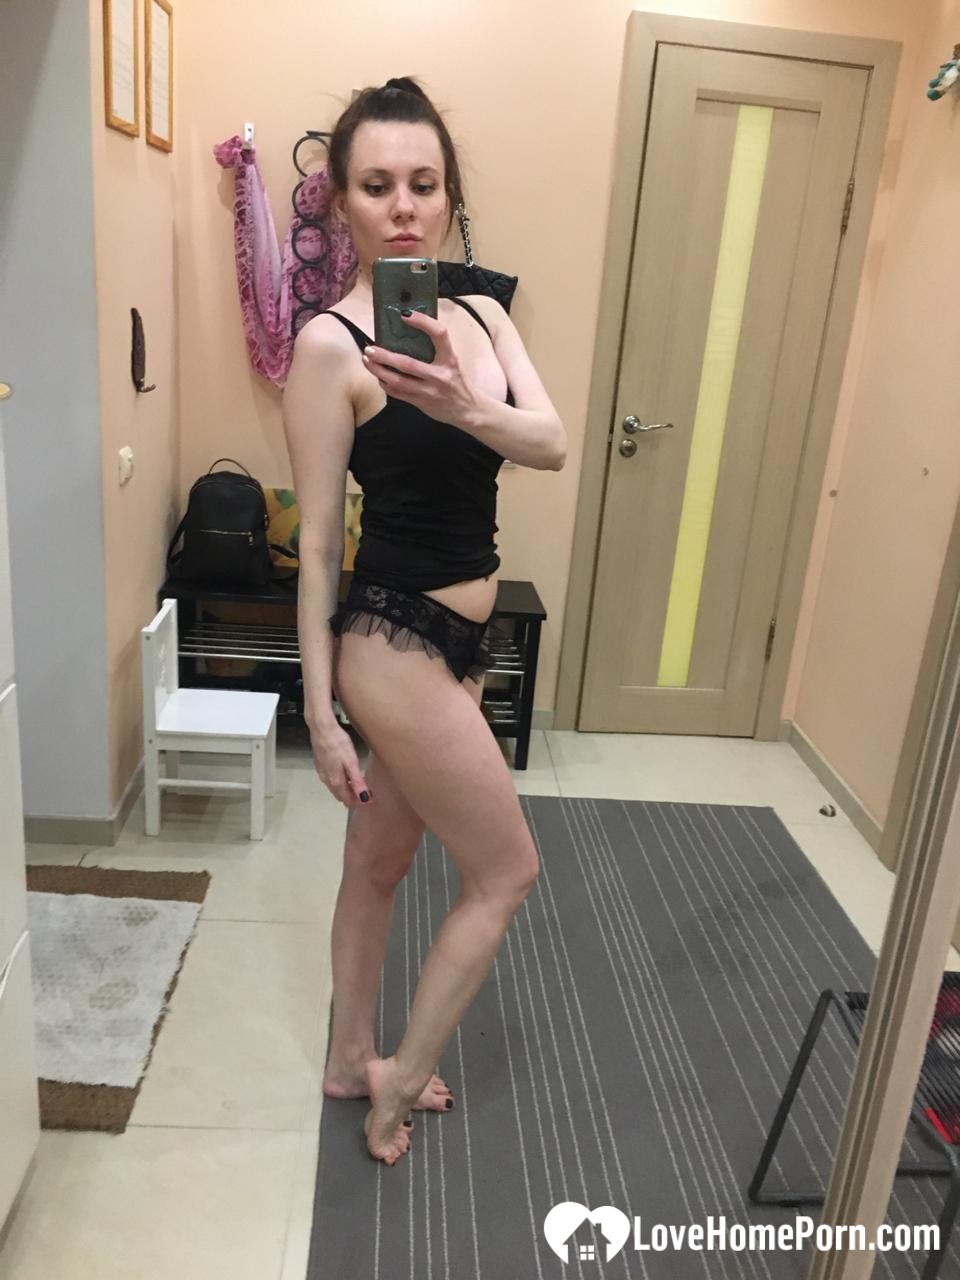 I think my boyfriend will love this outfit